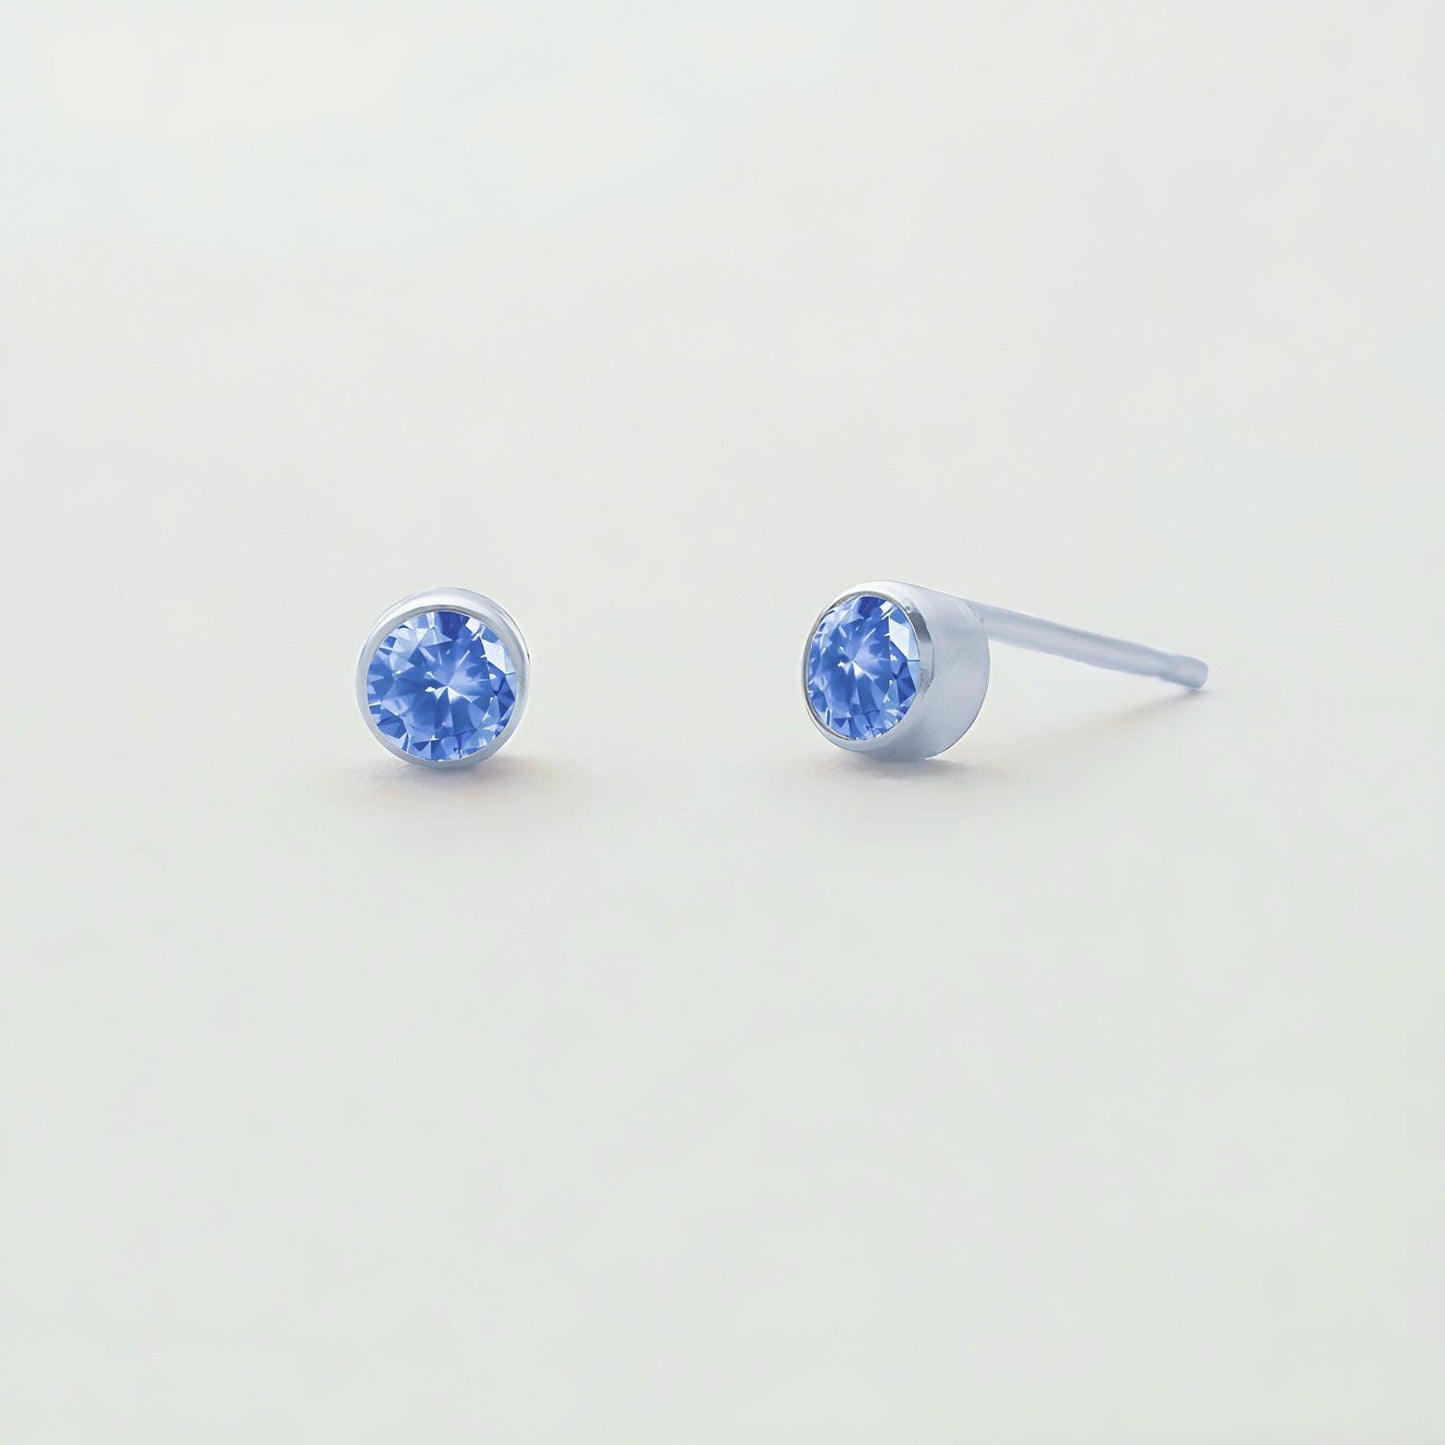 March Birthstone Cute Earrings for Christmas 2023 | March Birthstone Cute Earrings - undefined | Aquamarine Birthstone Earrings, birthstone earring, birthstone jewelry, Creative Cute Earrings | From Hunny Life | hunnylife.com